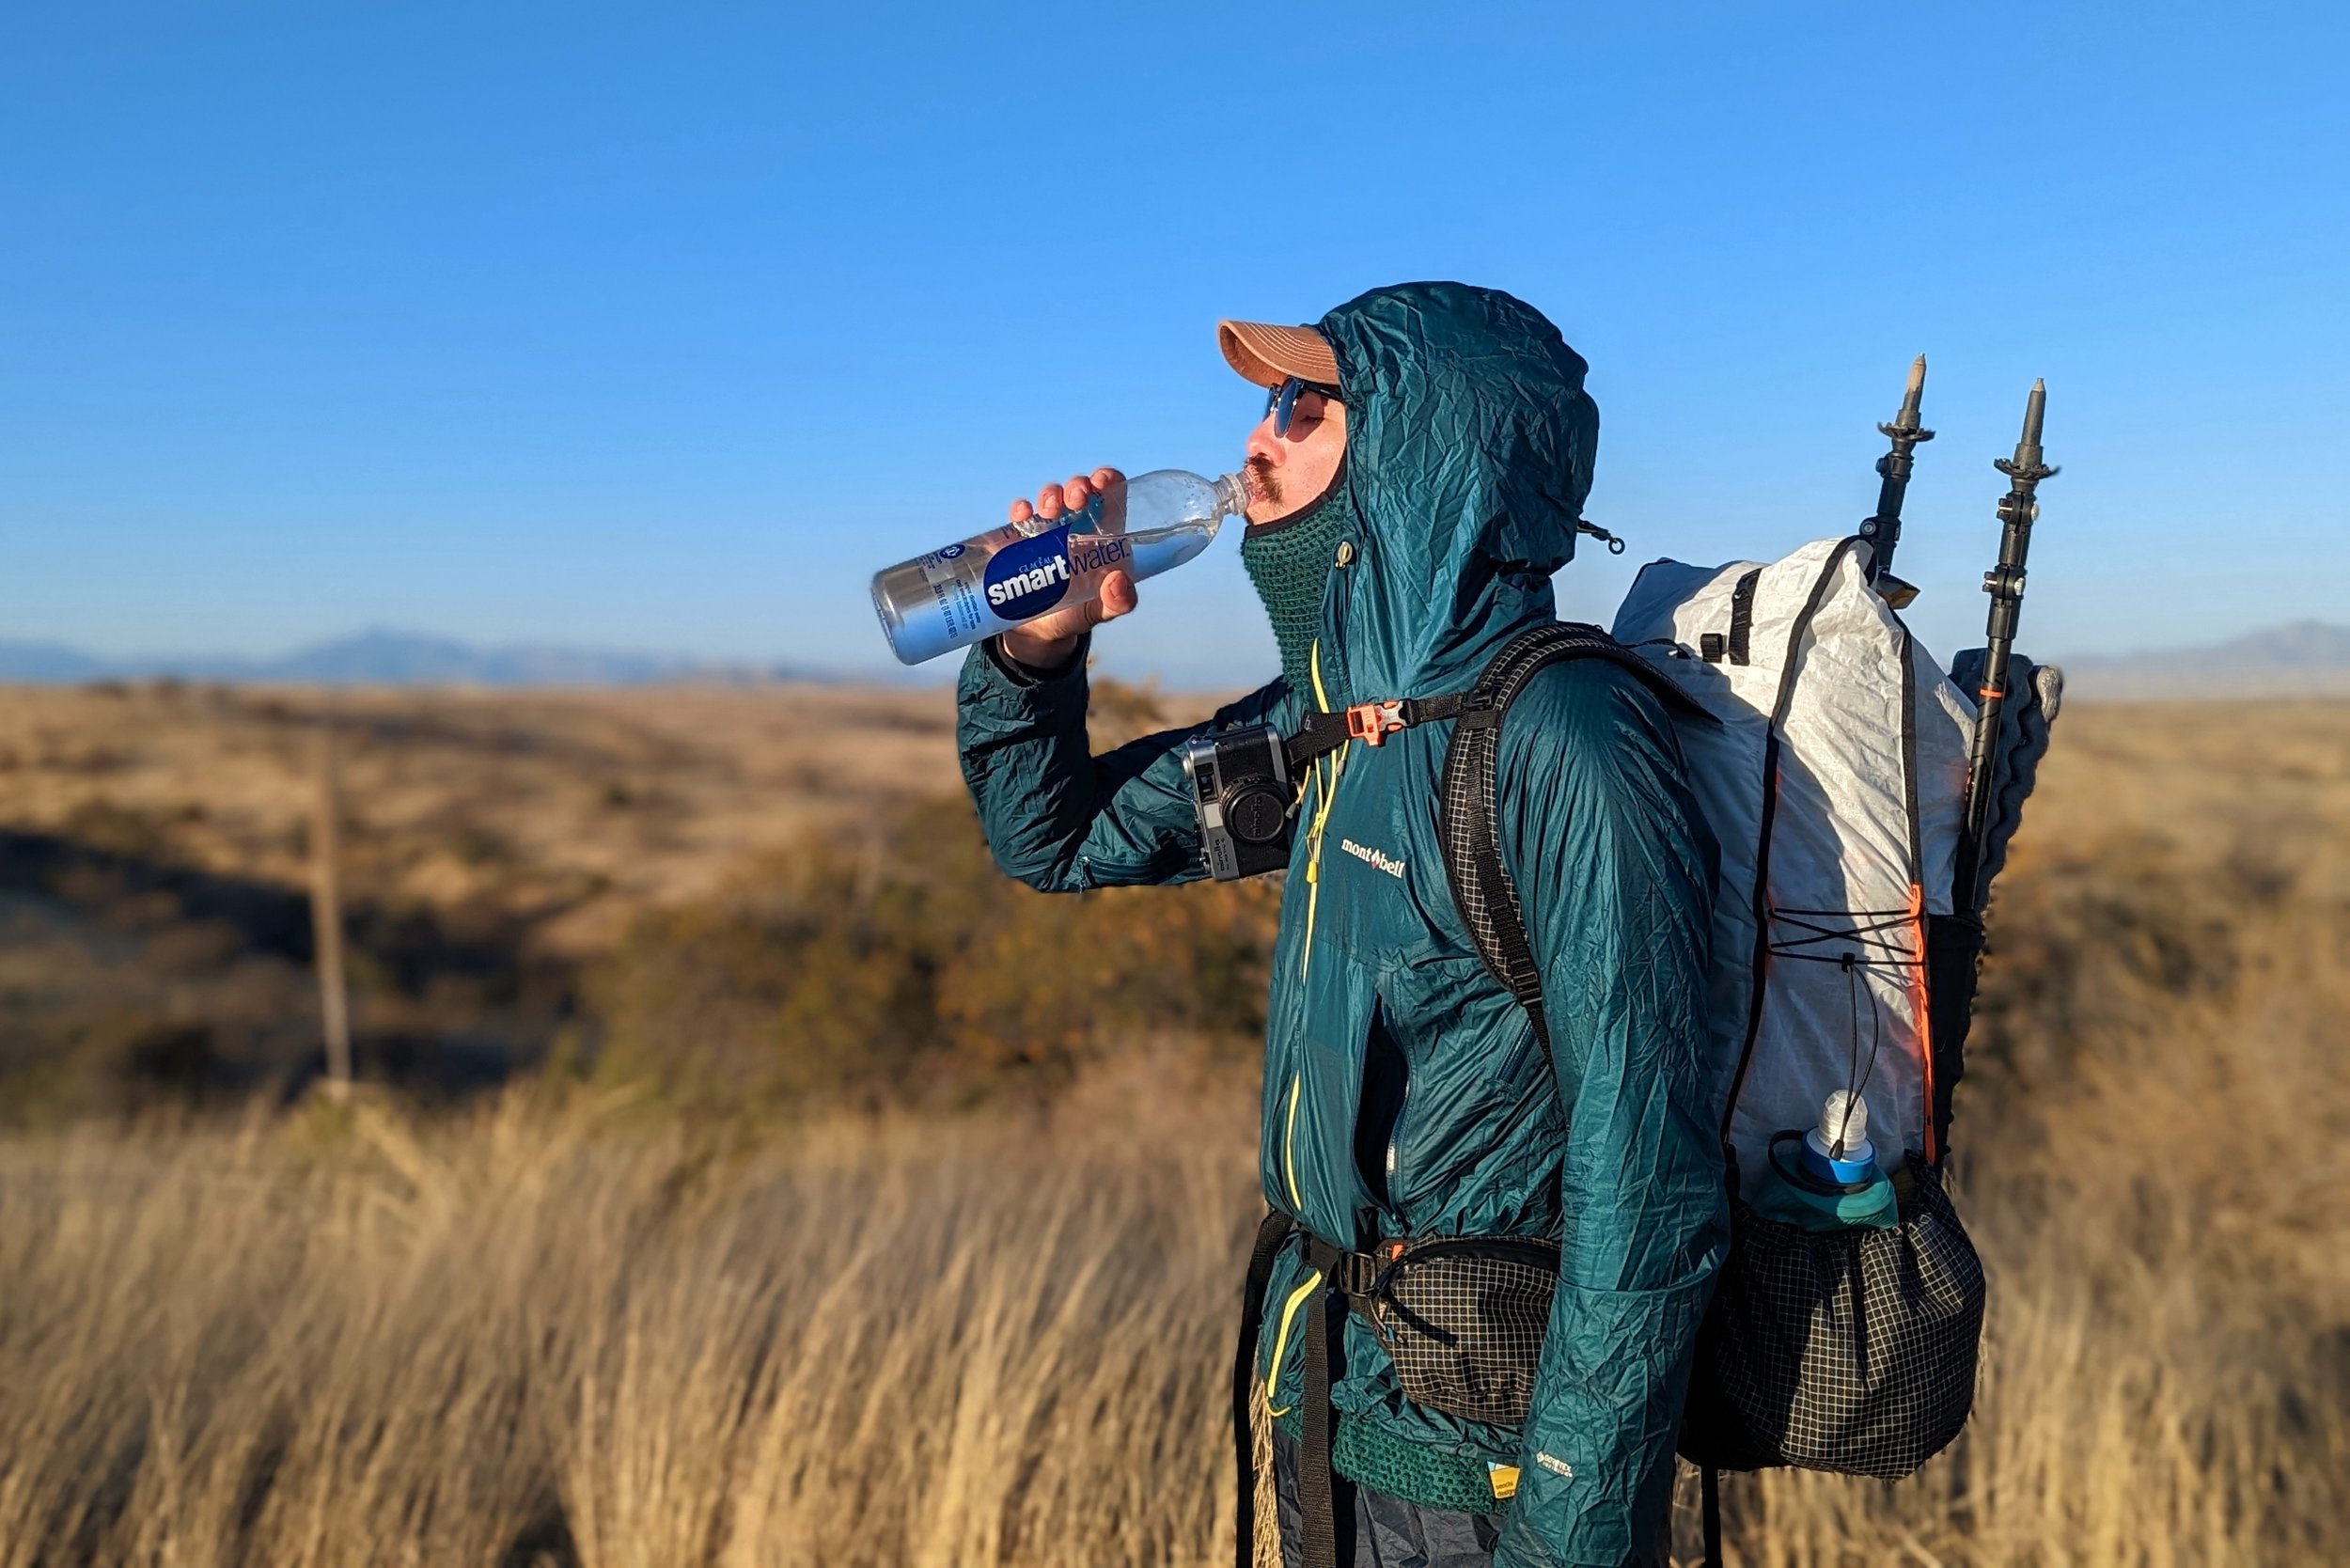 A side view of a hiker wearing the Hyperlite Mountain Gear Unbound 40 drinking from a smartwater bottle in a grassy desert landscape